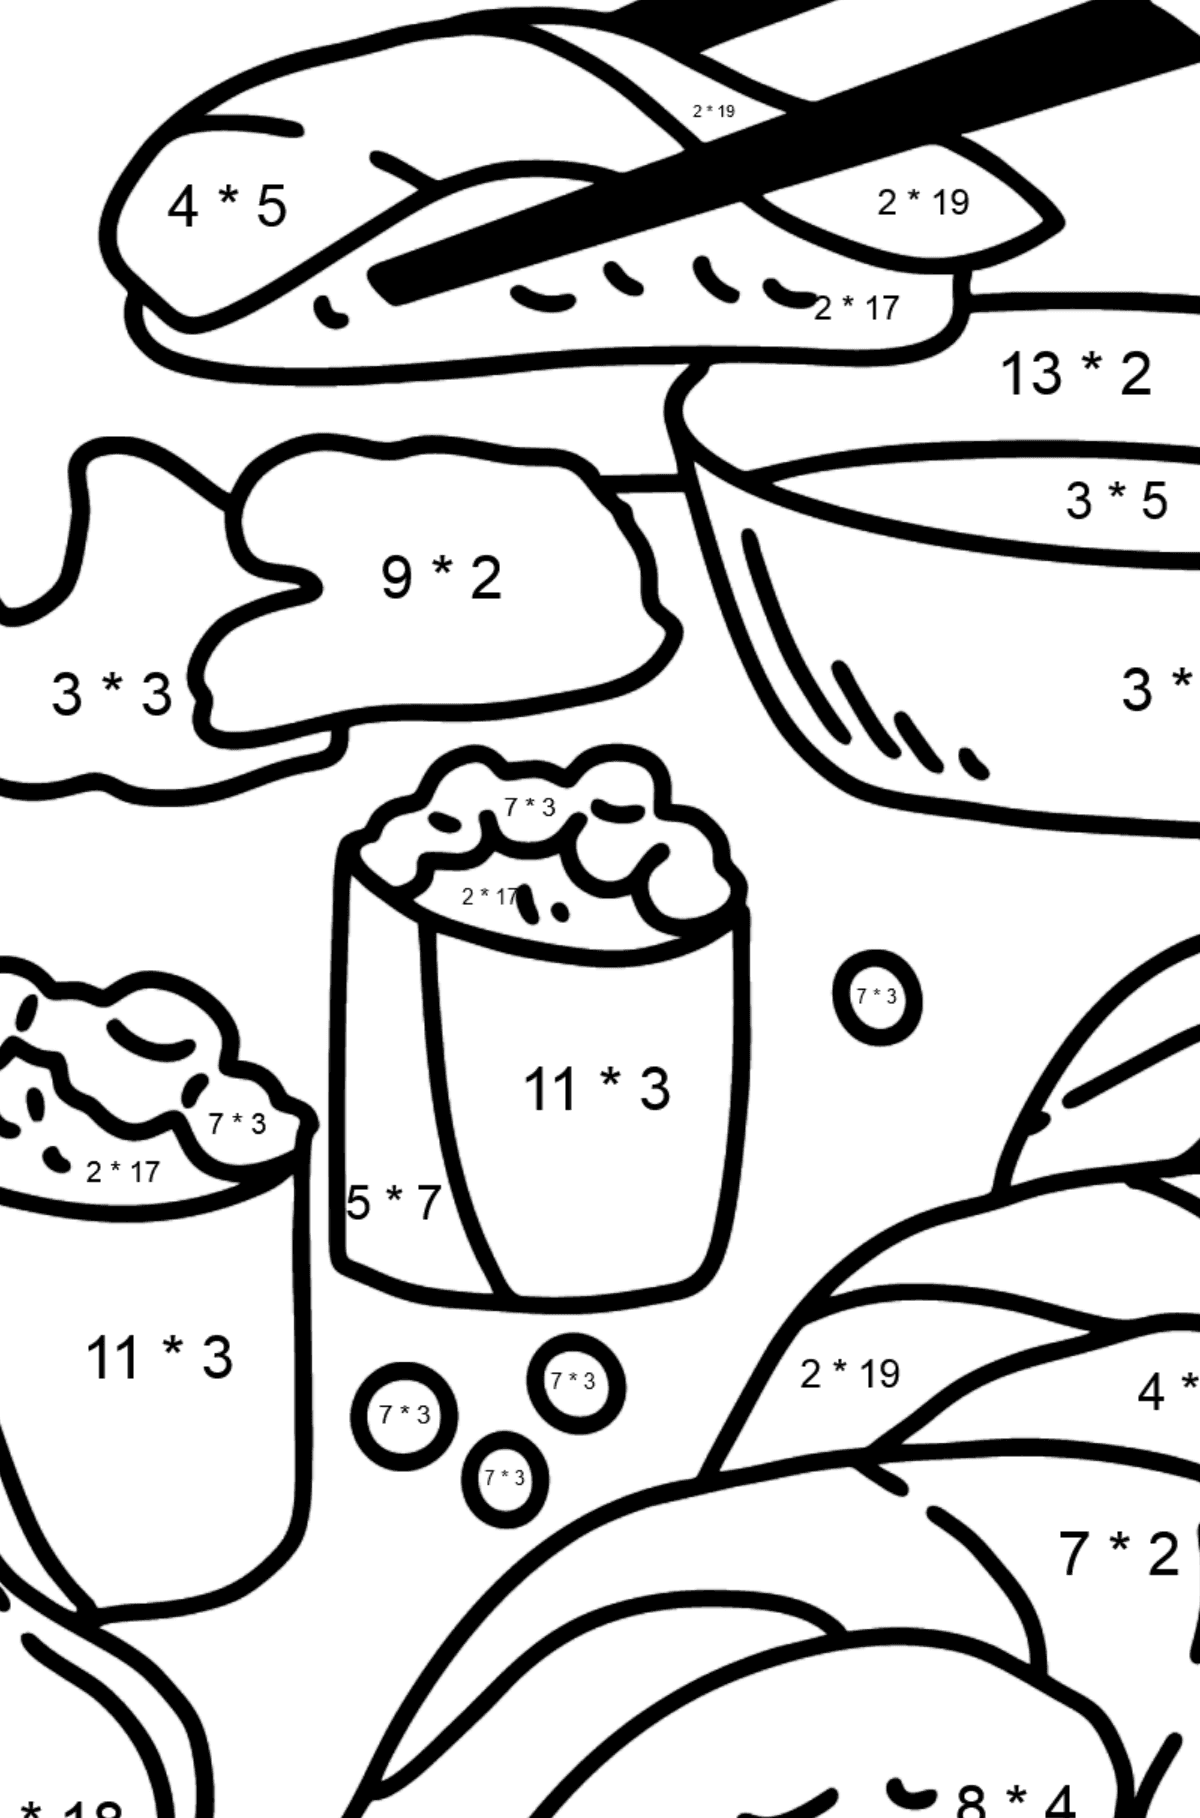 Sushi coloring page - Math Coloring - Multiplication for Kids